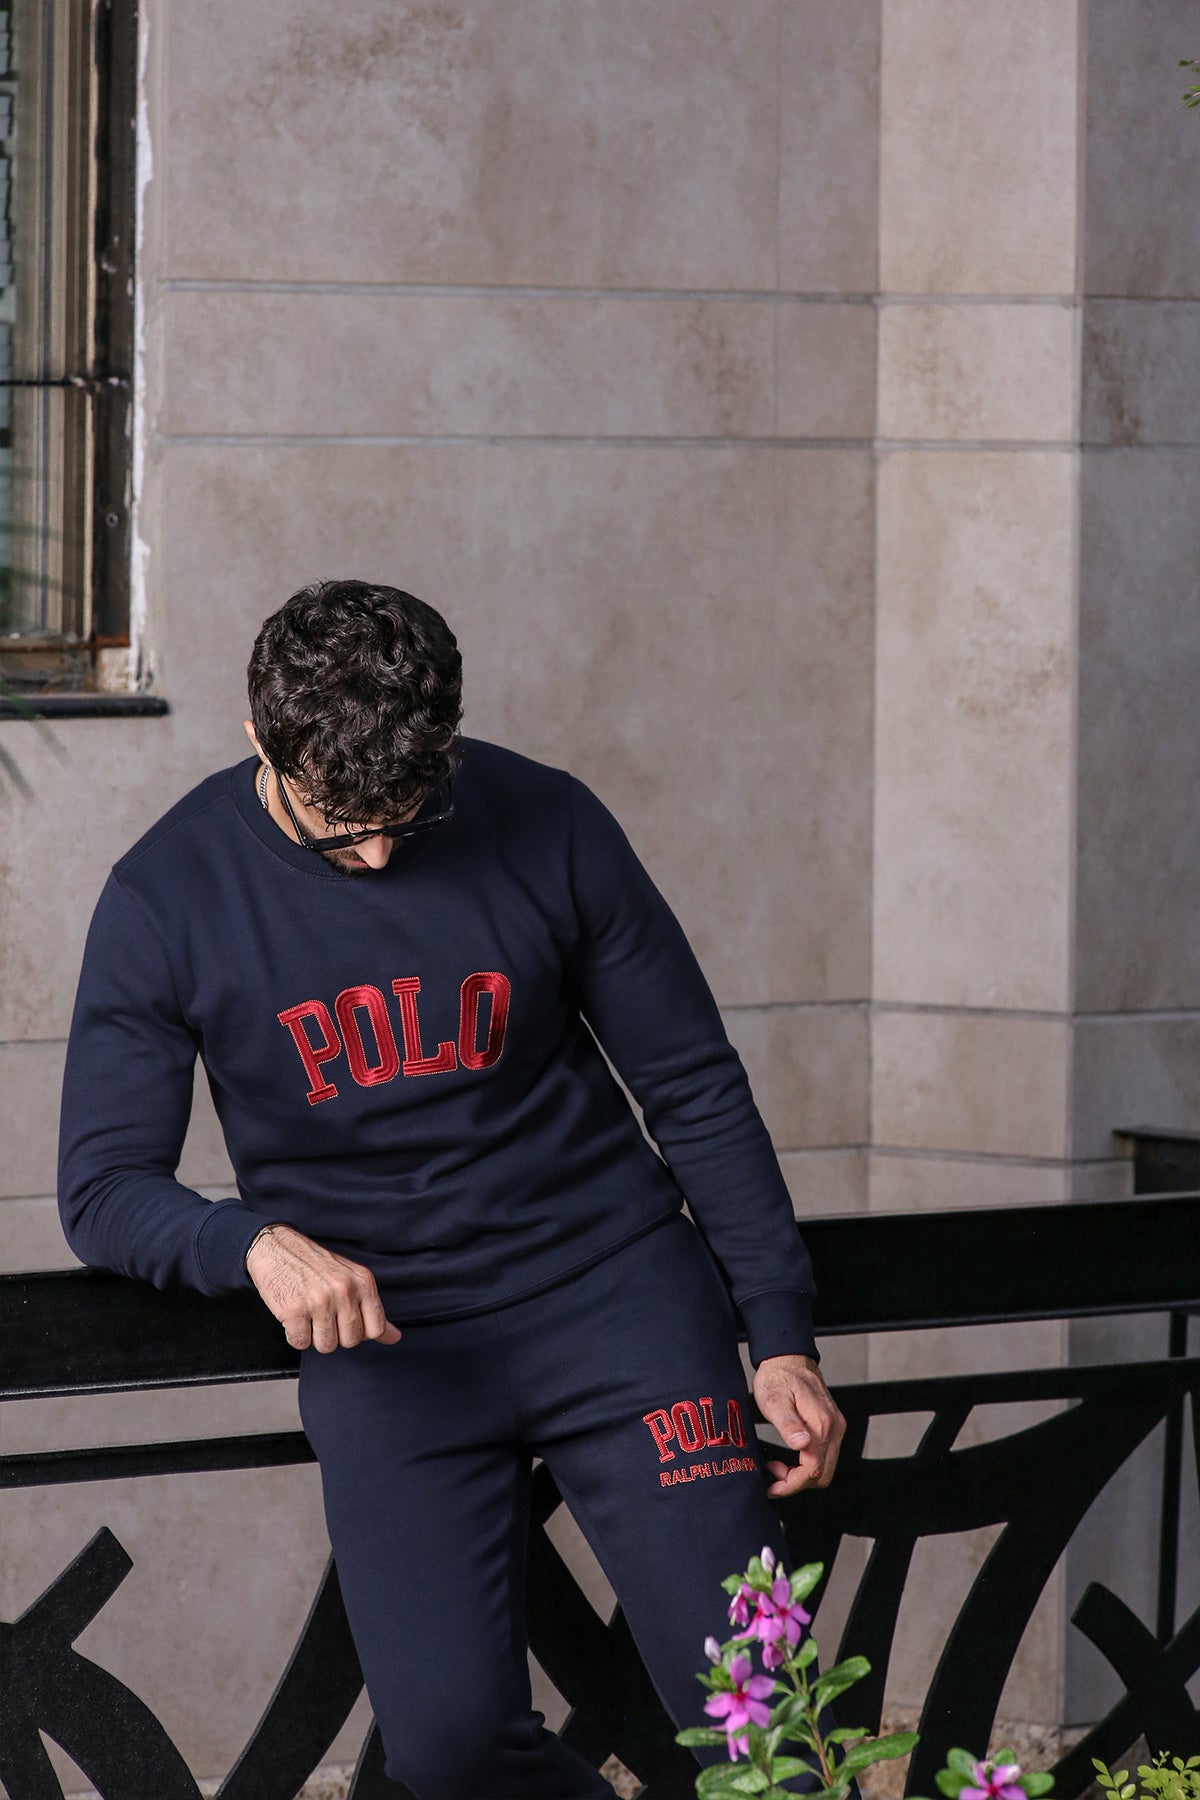 POLO Tracksuit